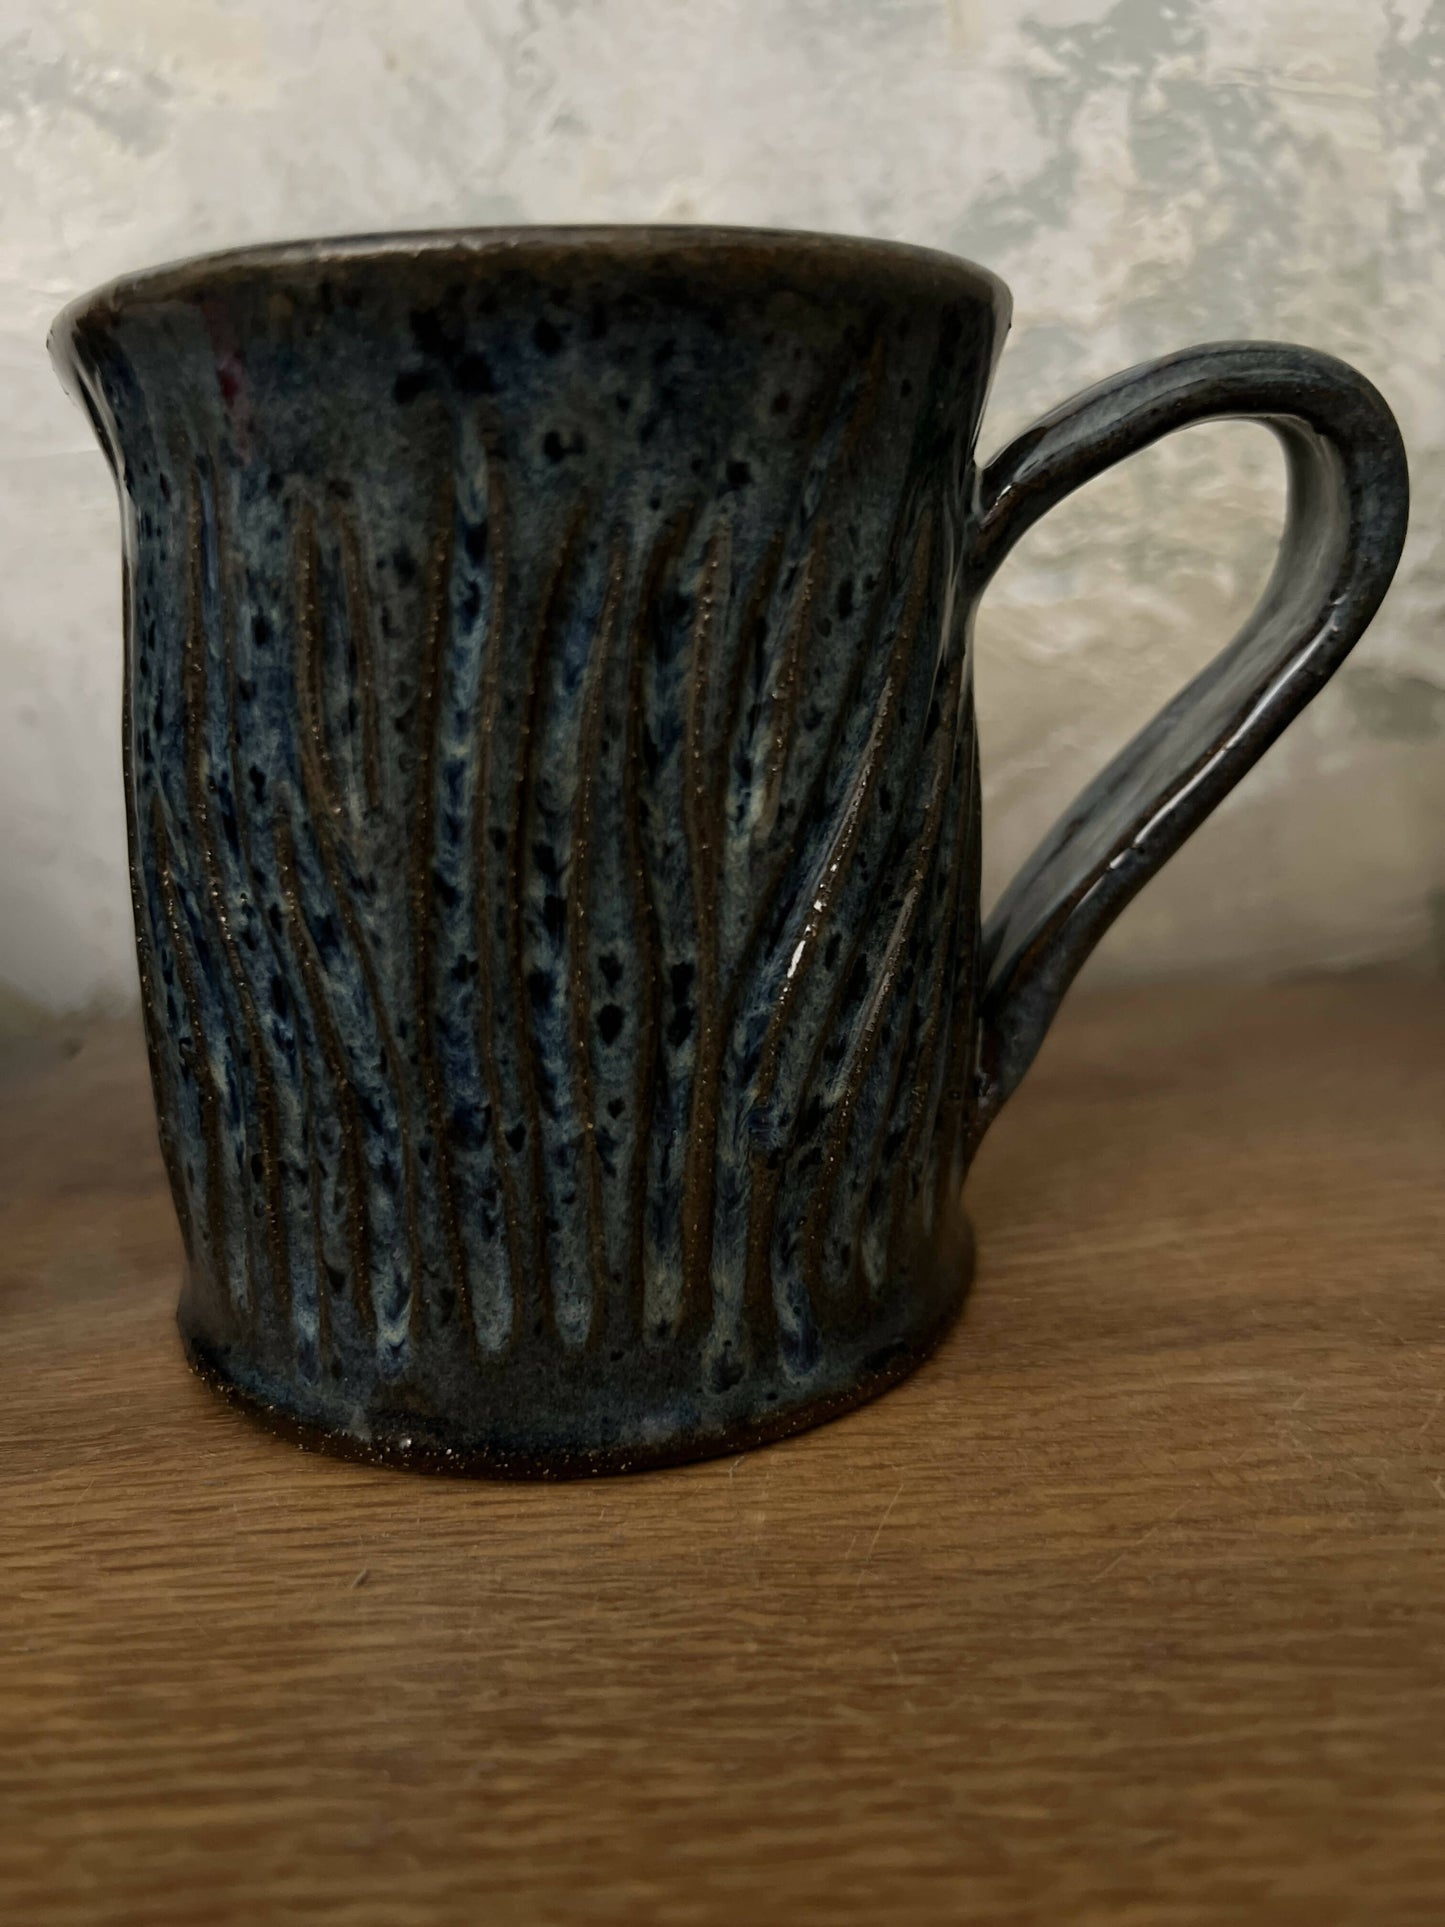 Chocolate creamer with carved surface